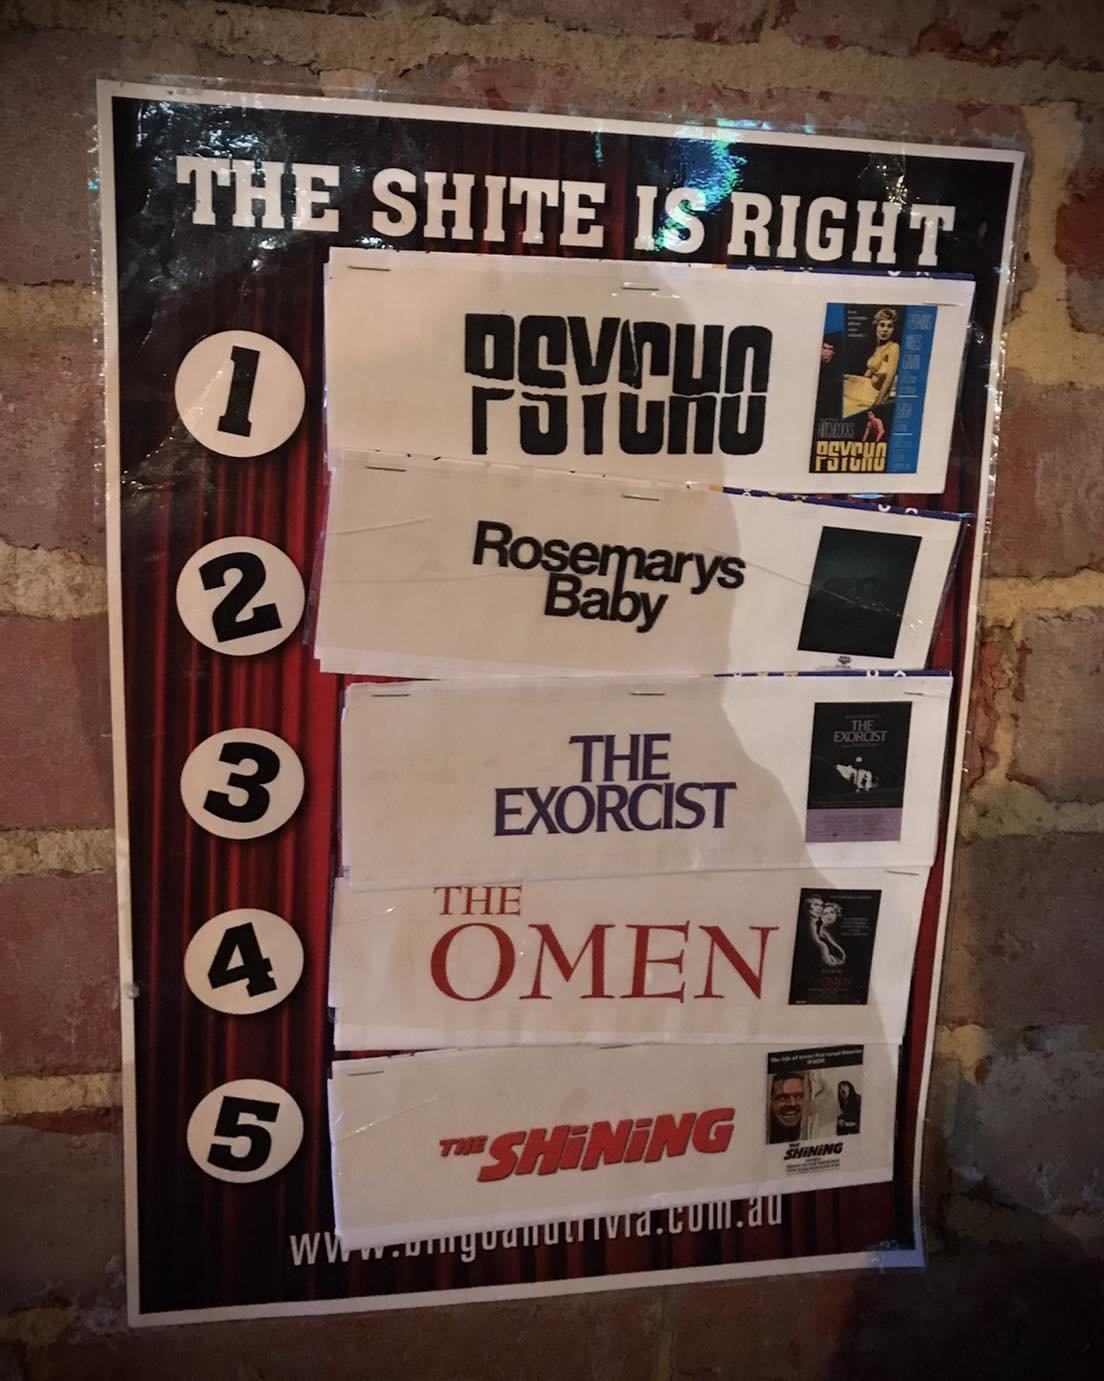 We&rsquo;re back again tonight for more trivia and of course, THE SHITE IS RIGHT!
Last week we had Classic Horror Movies. What will this weeks theme be? Find out 7:30pm at @theocpublicbar - 87 Poath Road, Murrumbeena (Directly under Hughesdale Statio